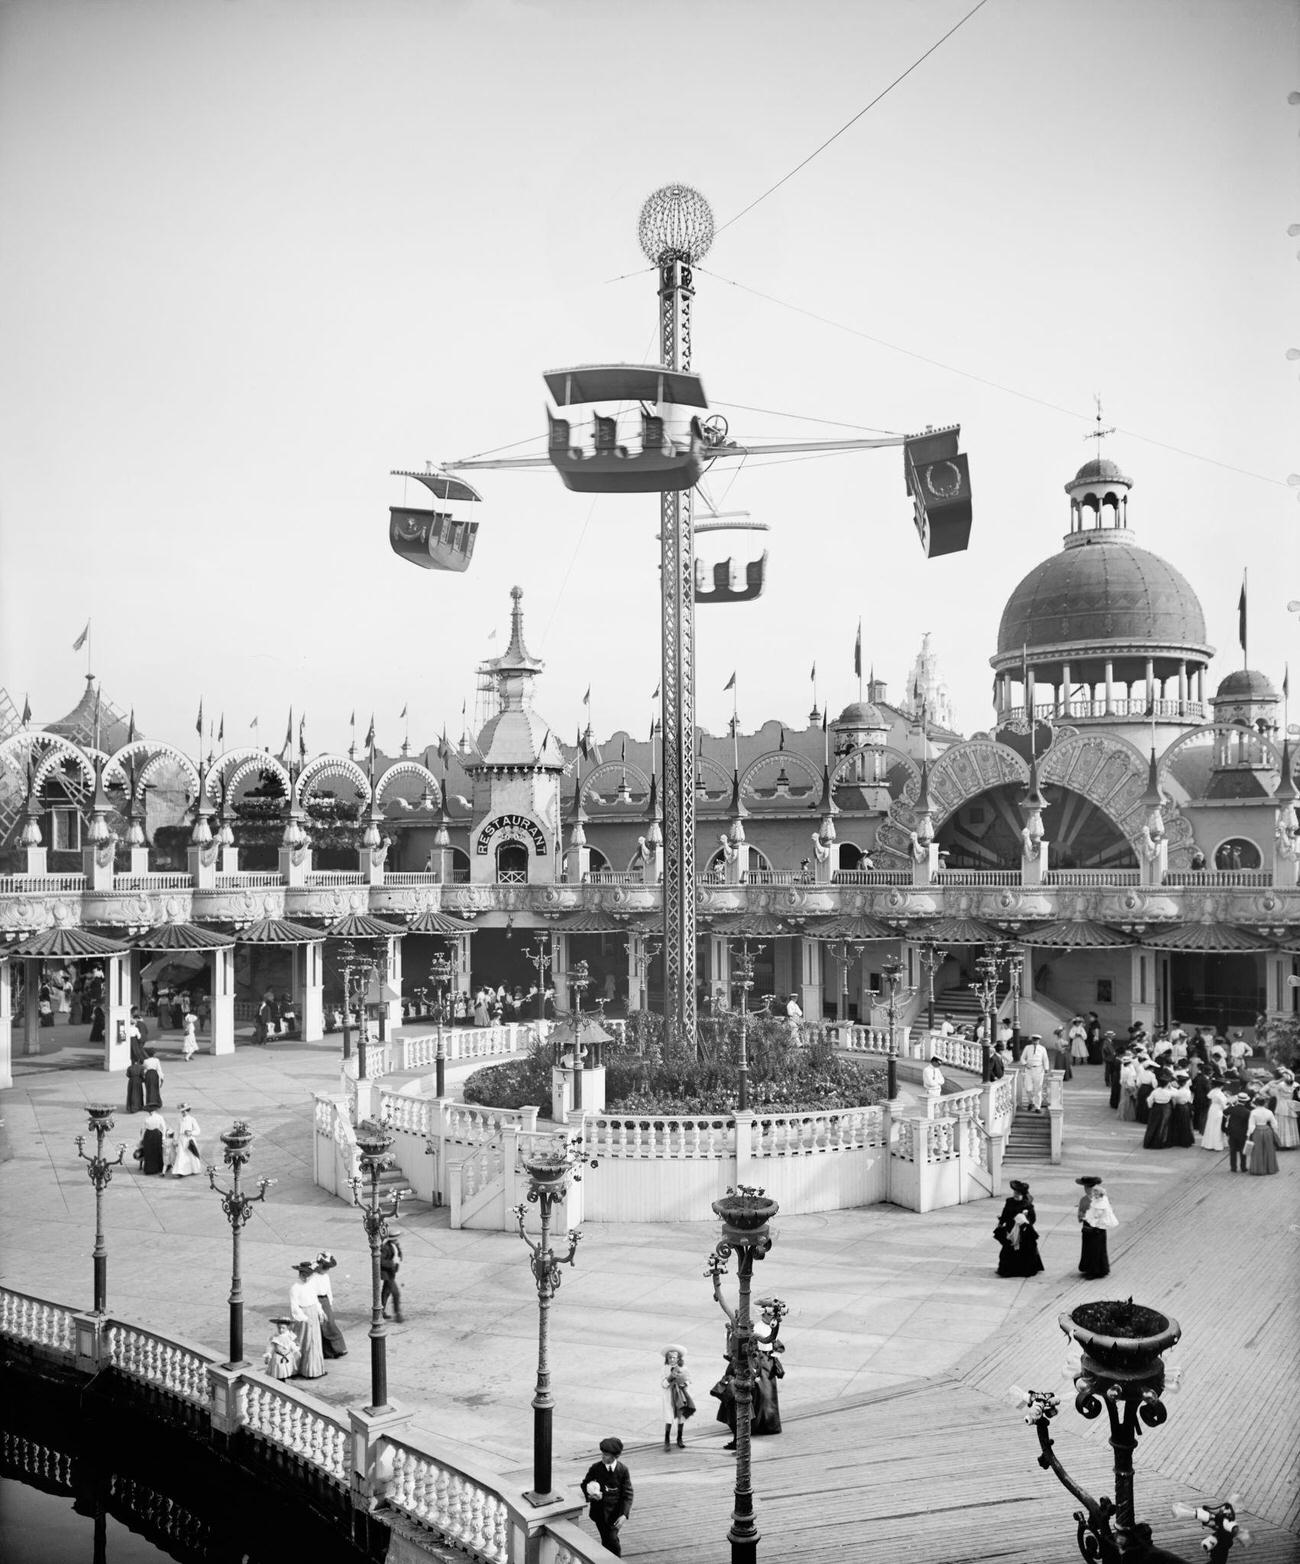 Whirl Of The Whirl Ride At Luna Park, 1905